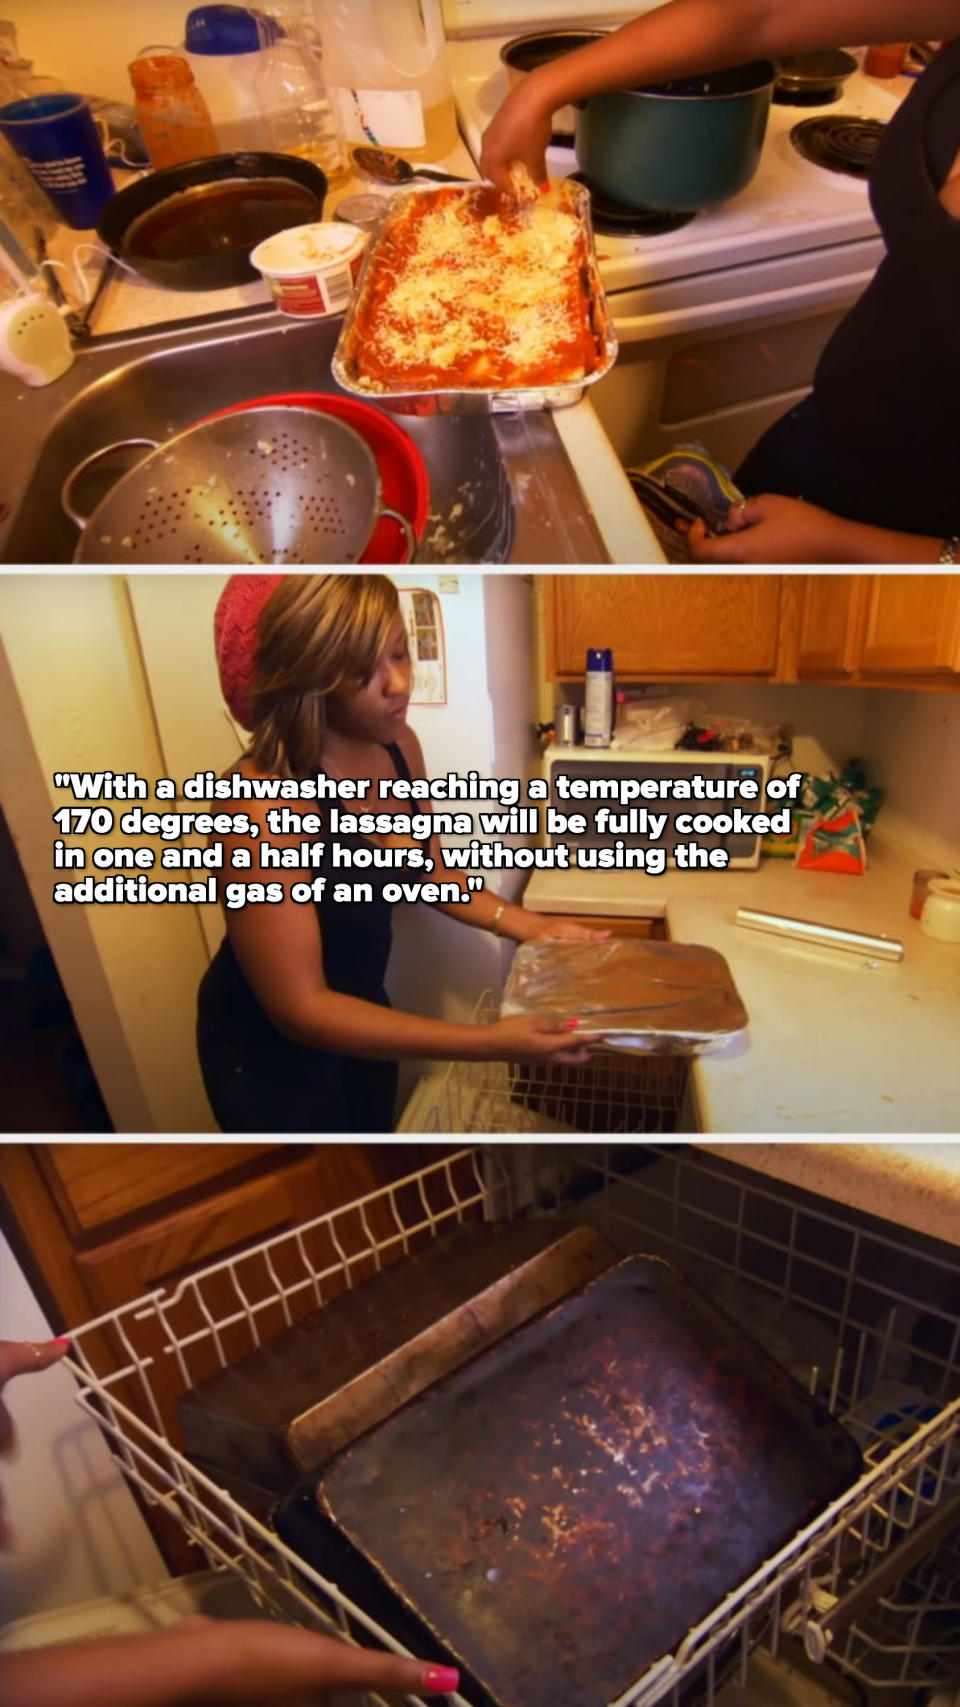 Three images: Top shows lasagna dish, middle features person cooking in a kitchen, and bottom depicts a dirty baking tray in a dishwasher